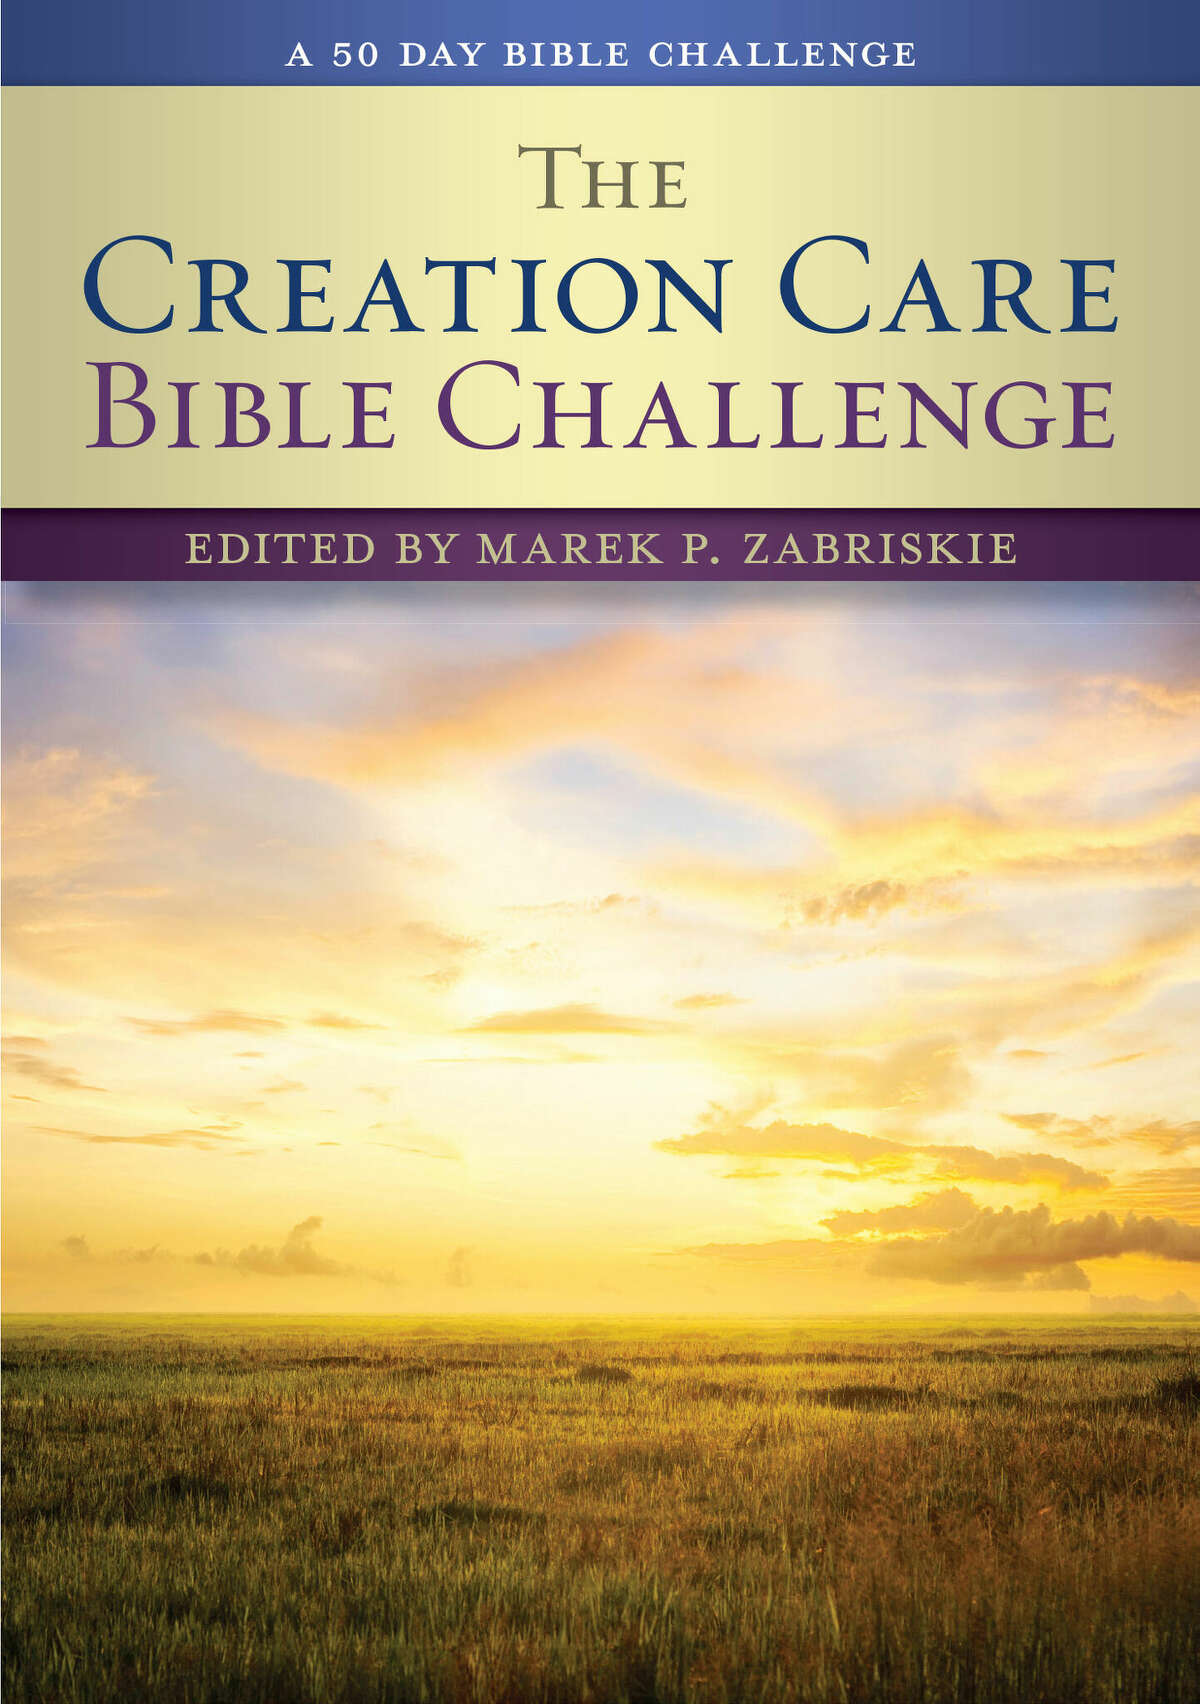 "The Creation Care Bible Challenge," a collection edited by Christ Church Greenwich Rector Rev. Marek Zabriskie, has been awarded the 2023 gold medal for Bible Study by the 2023 Illumination Book Awards. 